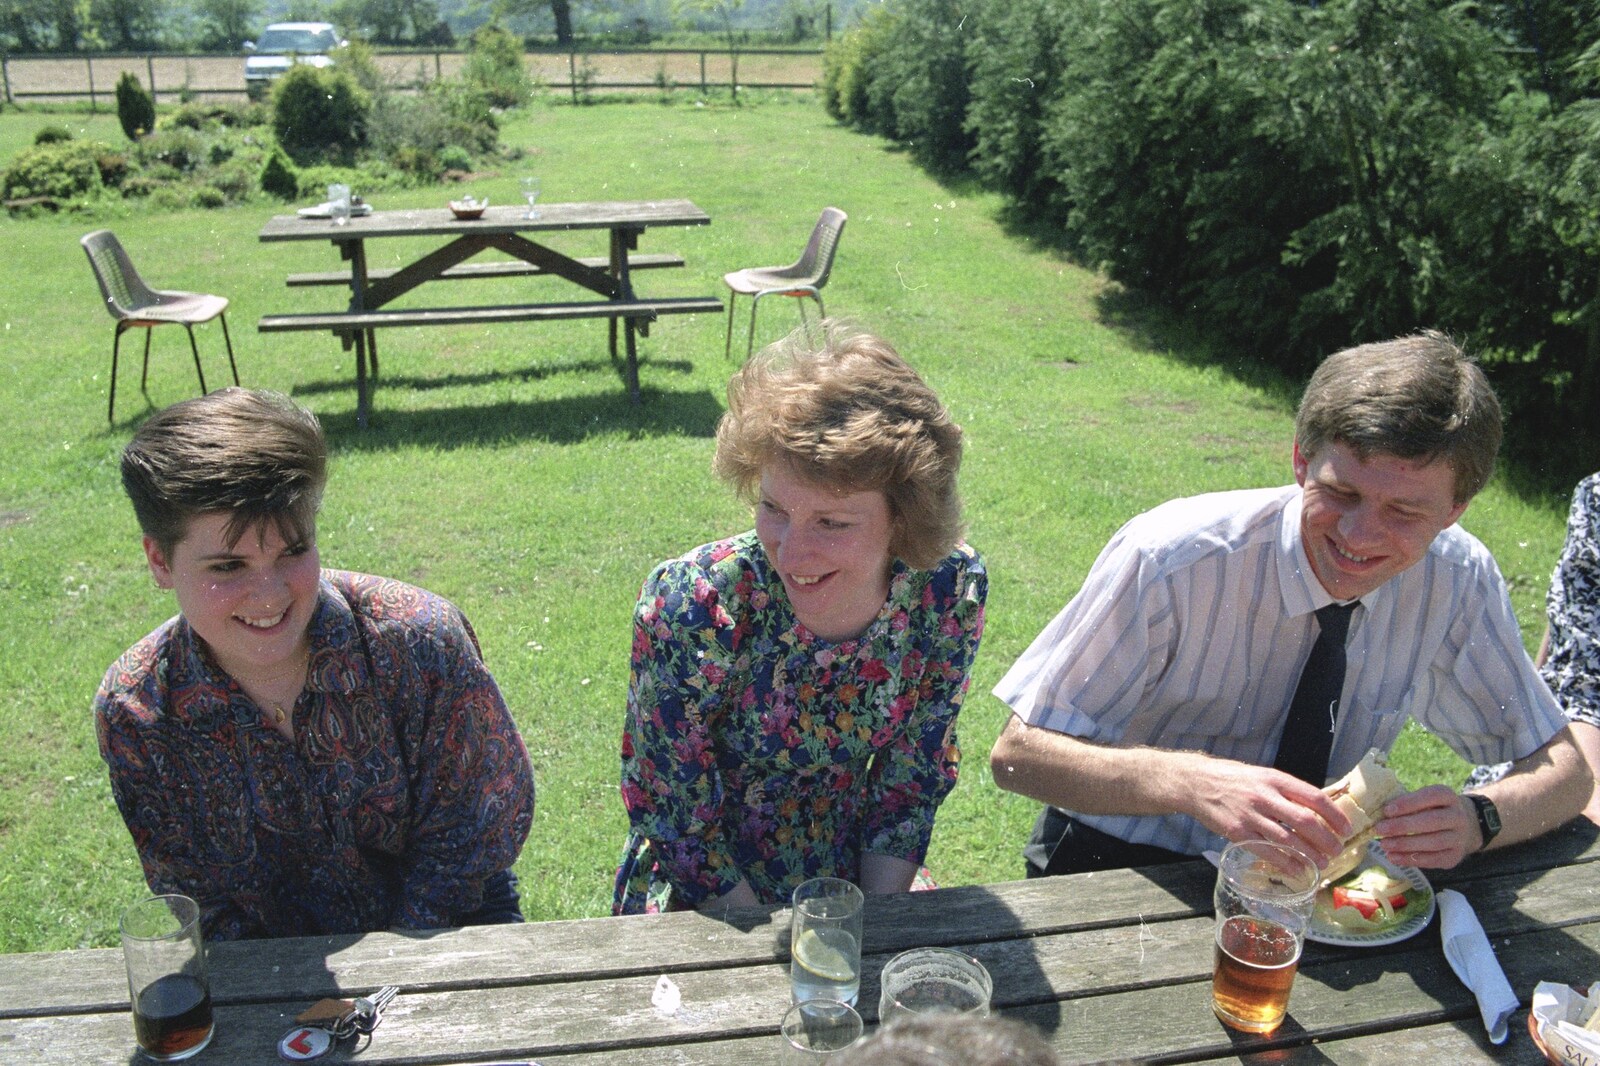 Kelly, Alison and Steve-O from Kelly's Printec Birthday, Roydon, Norfolk - 2nd May 1990